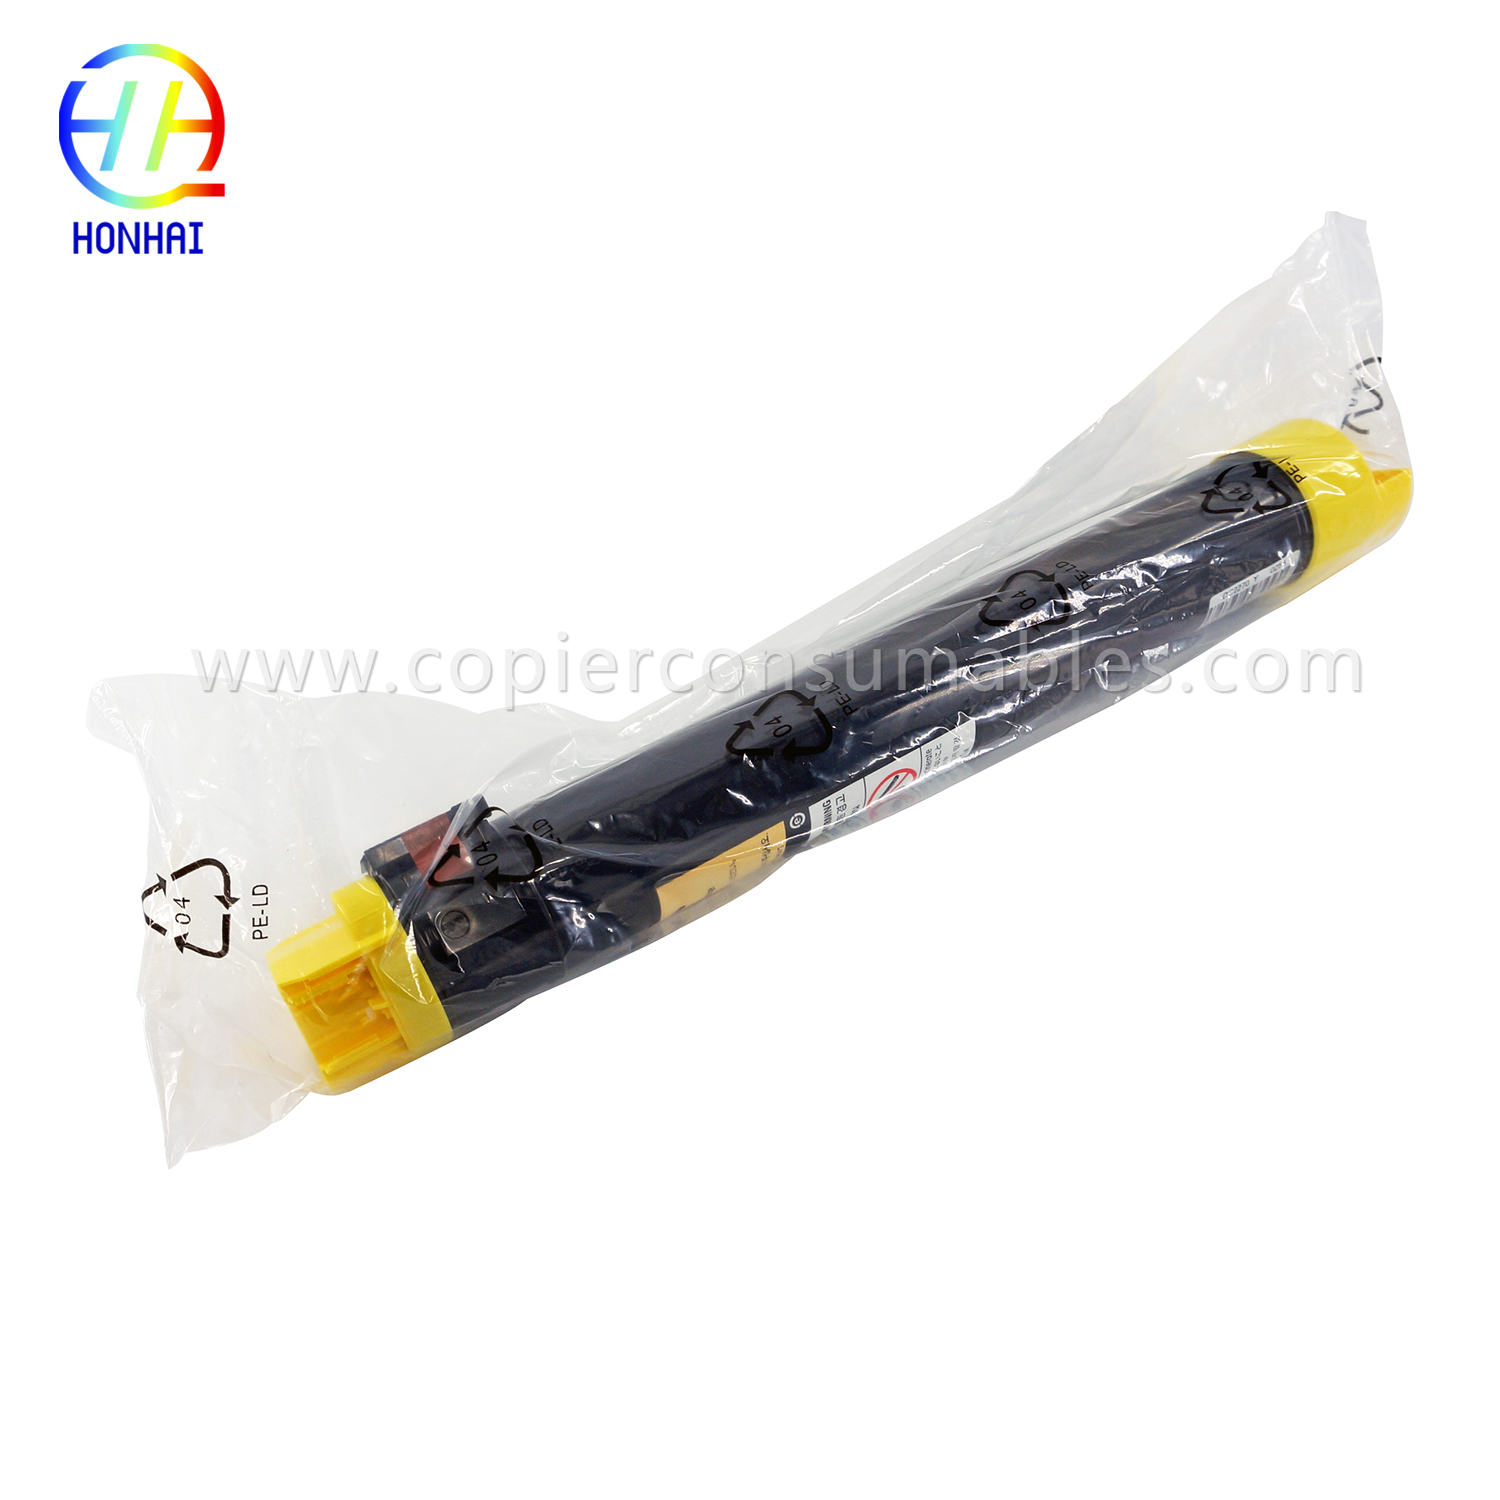 Toner Cartridge For Xerox Docucentre and Apeosport IV C2270 C2275 C3370 C3371 C3373 C3375 C4470 C4475 C5570 C5575 For Xerox Docucentre and Apeosport V C2275 C3373 C4475 C5575 C6675 C7775 (20) 拷贝